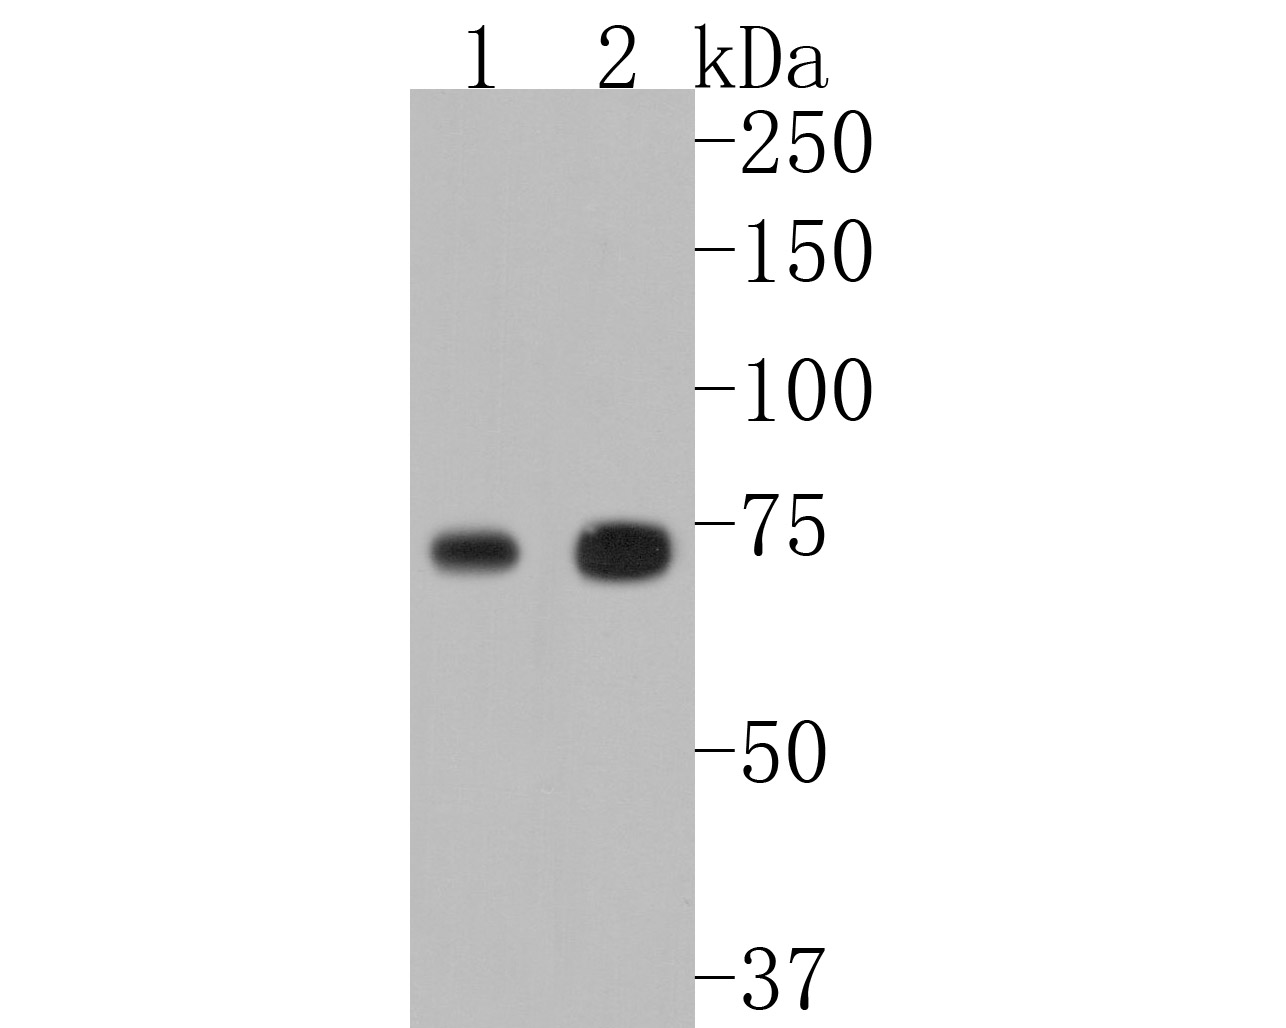 ICC staining of TAK1 in A431 cells (green). Formalin fixed cells were permeabilized with 0.1% Triton X-100 in TBS for 10 minutes at room temperature and blocked with 1% Blocker BSA for 15 minutes at room temperature. Cells were probed with the primary antibody (ET1705-14, 1/50) for 1 hour at room temperature, washed with PBS. Alexa Fluor®488 Goat anti-Rabbit IgG was used as the secondary antibody at 1/1,000 dilution. The nuclear counter stain is DAPI (blue).